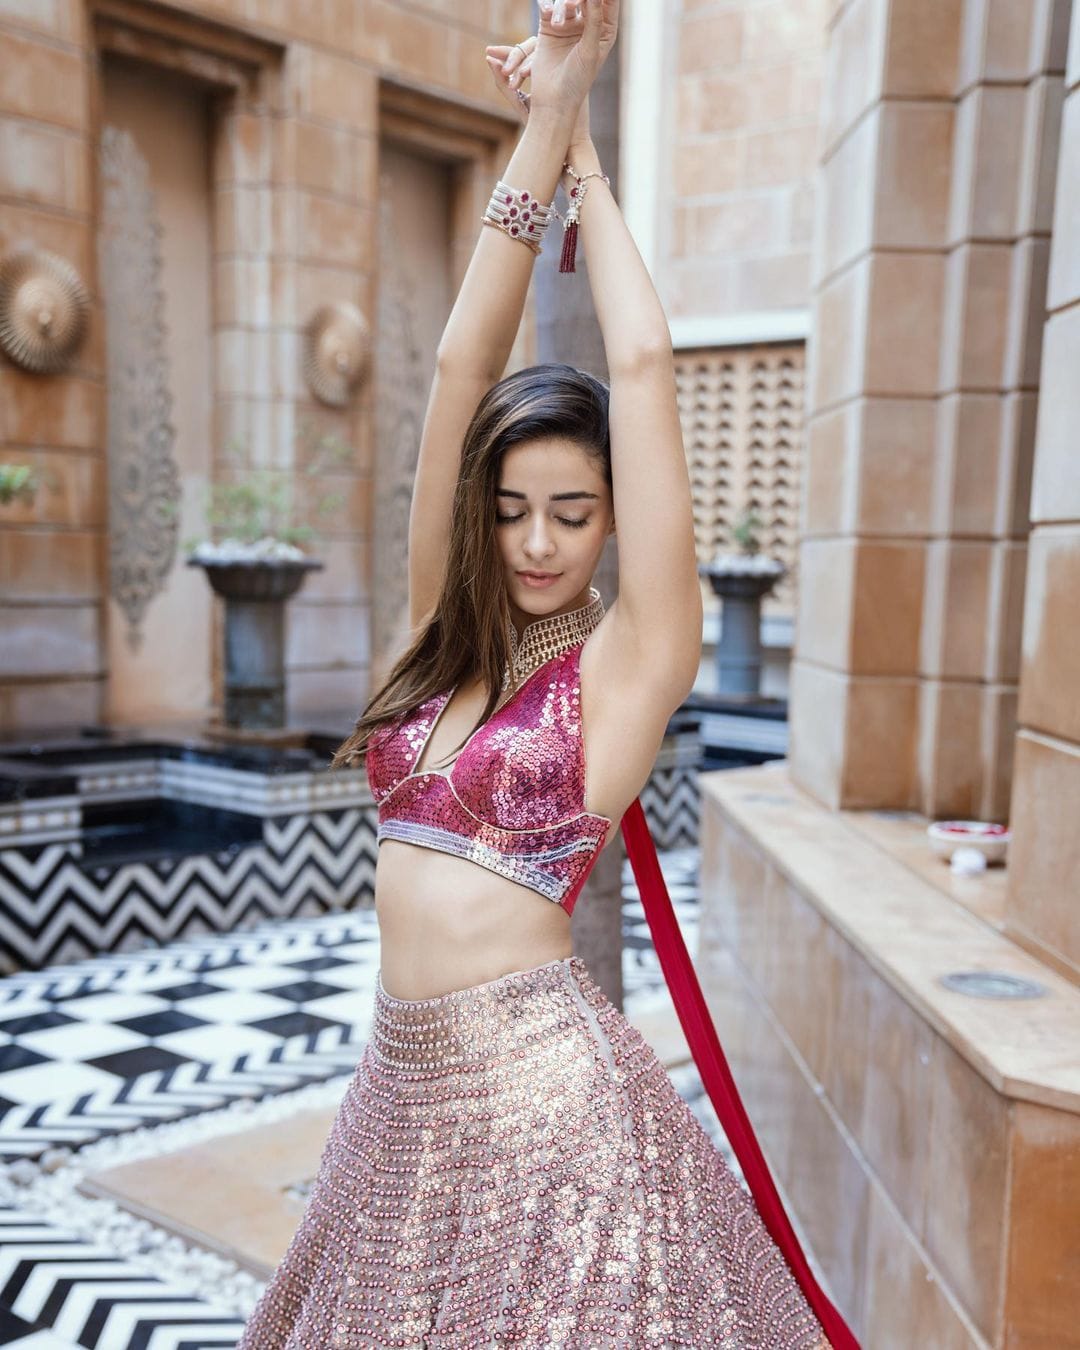 Ananya Panday looks drop-dead gorgeous in the sequinned lehenga.